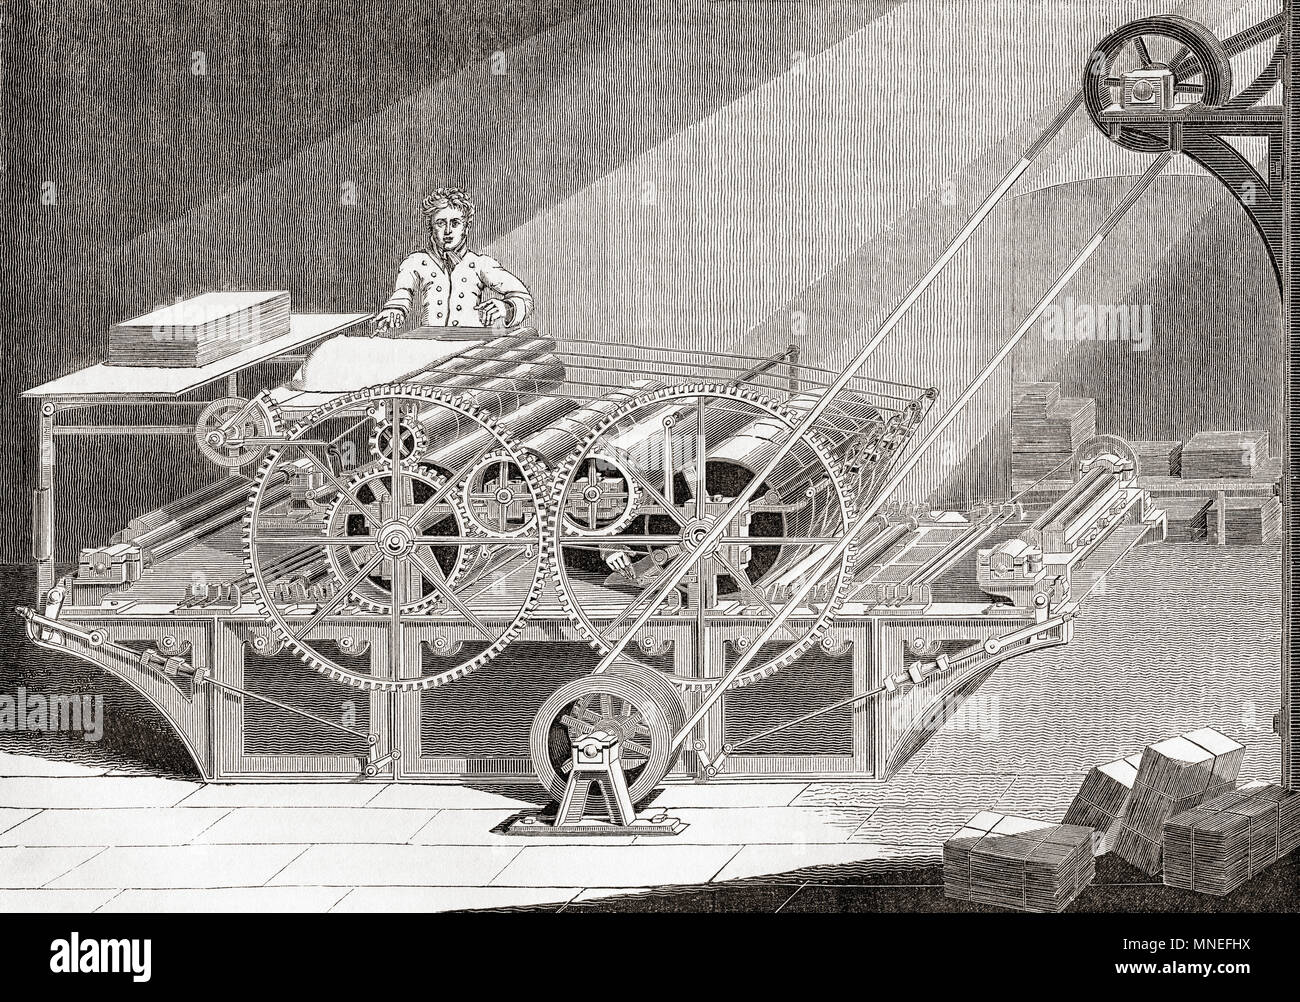 A 19th century steam printing machine.  From Old England: A Pictorial Museum, published 1847. Stock Photo